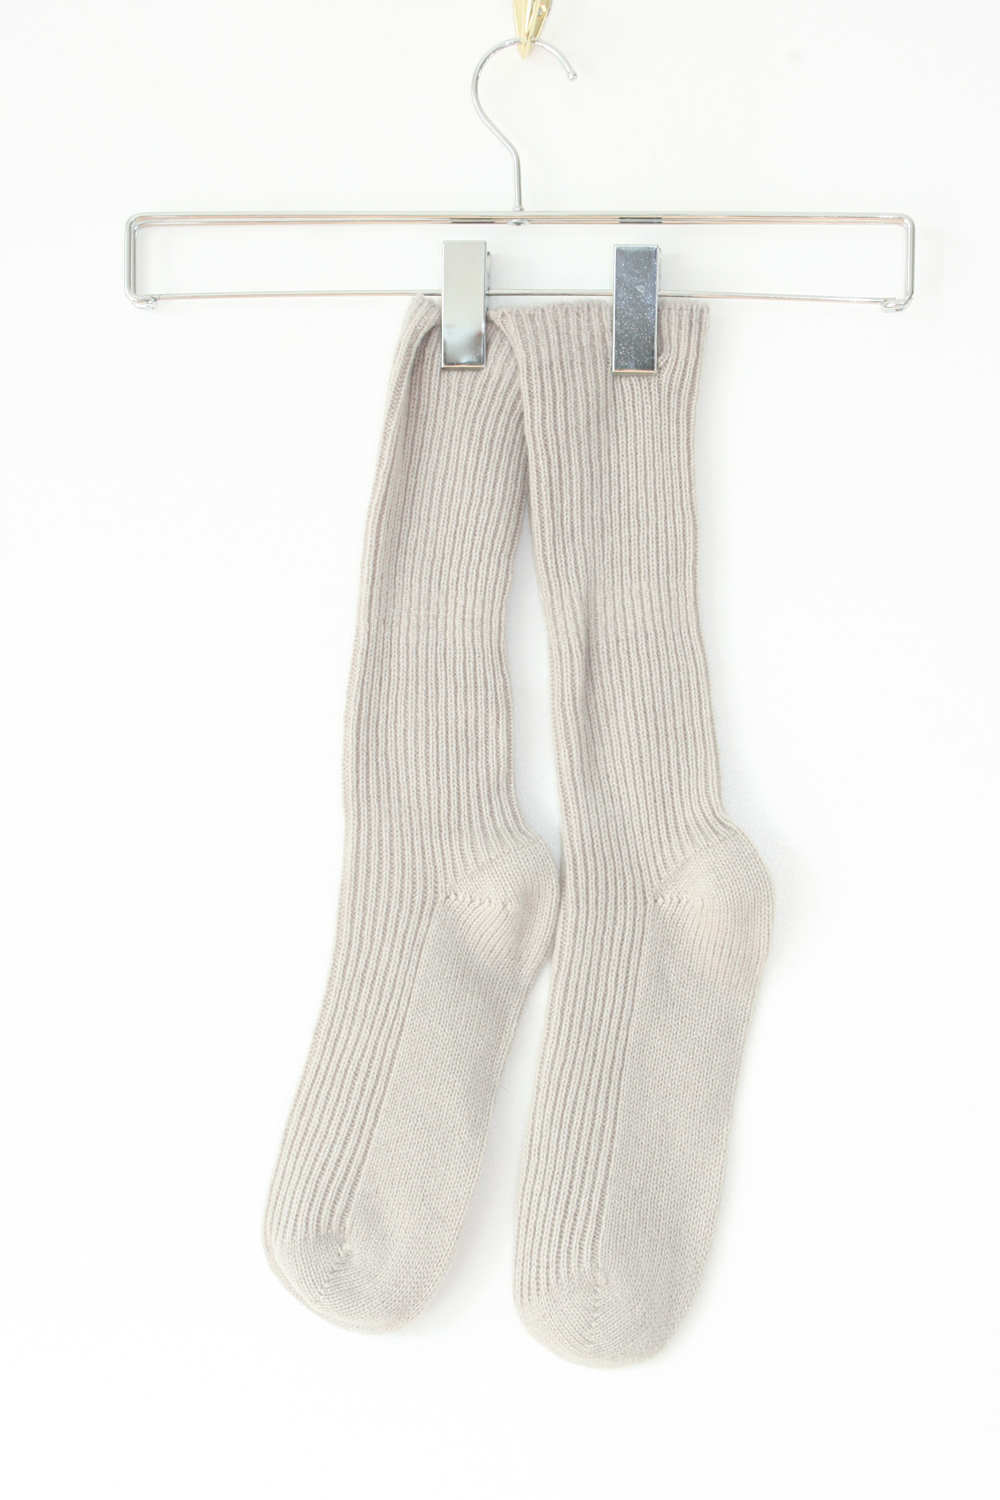 exquisitely soft and warm - the ultimate bed sock